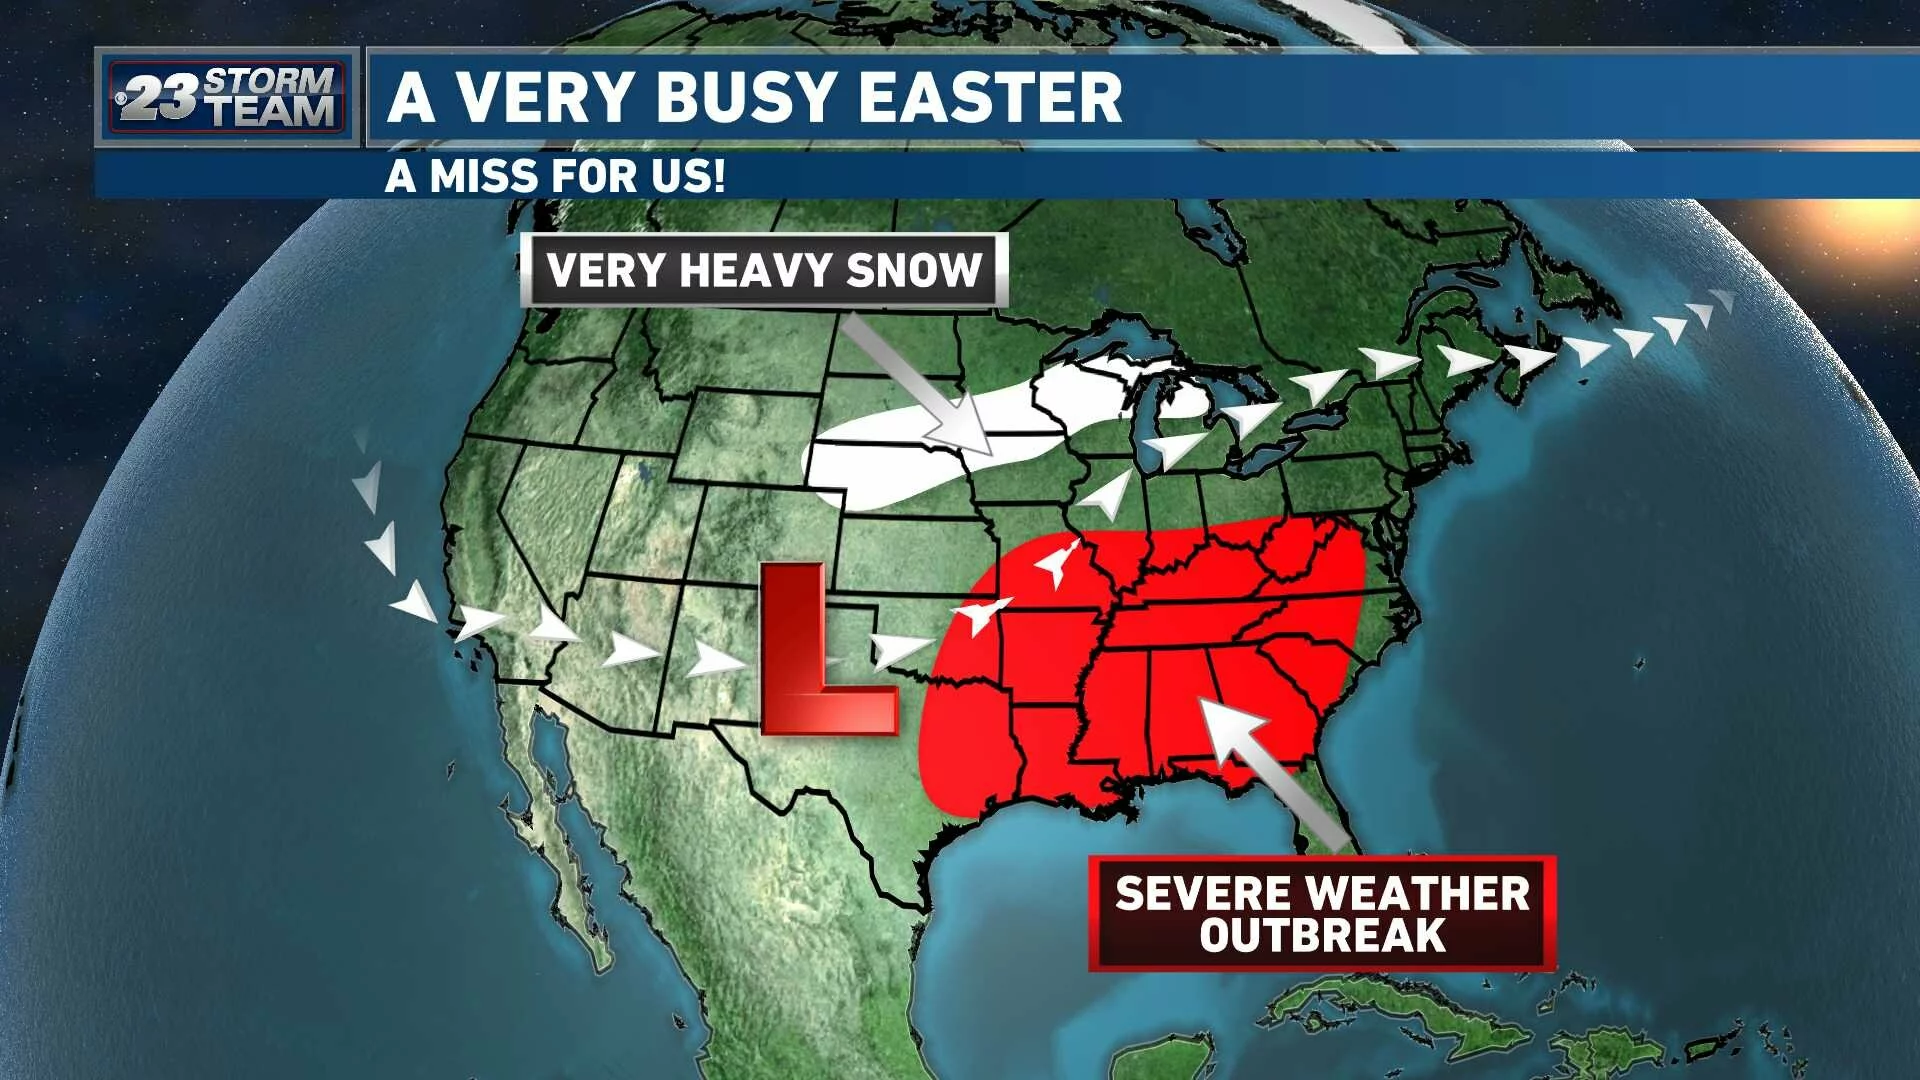 A very busy Easter for much of the United States, a temperature crash follows